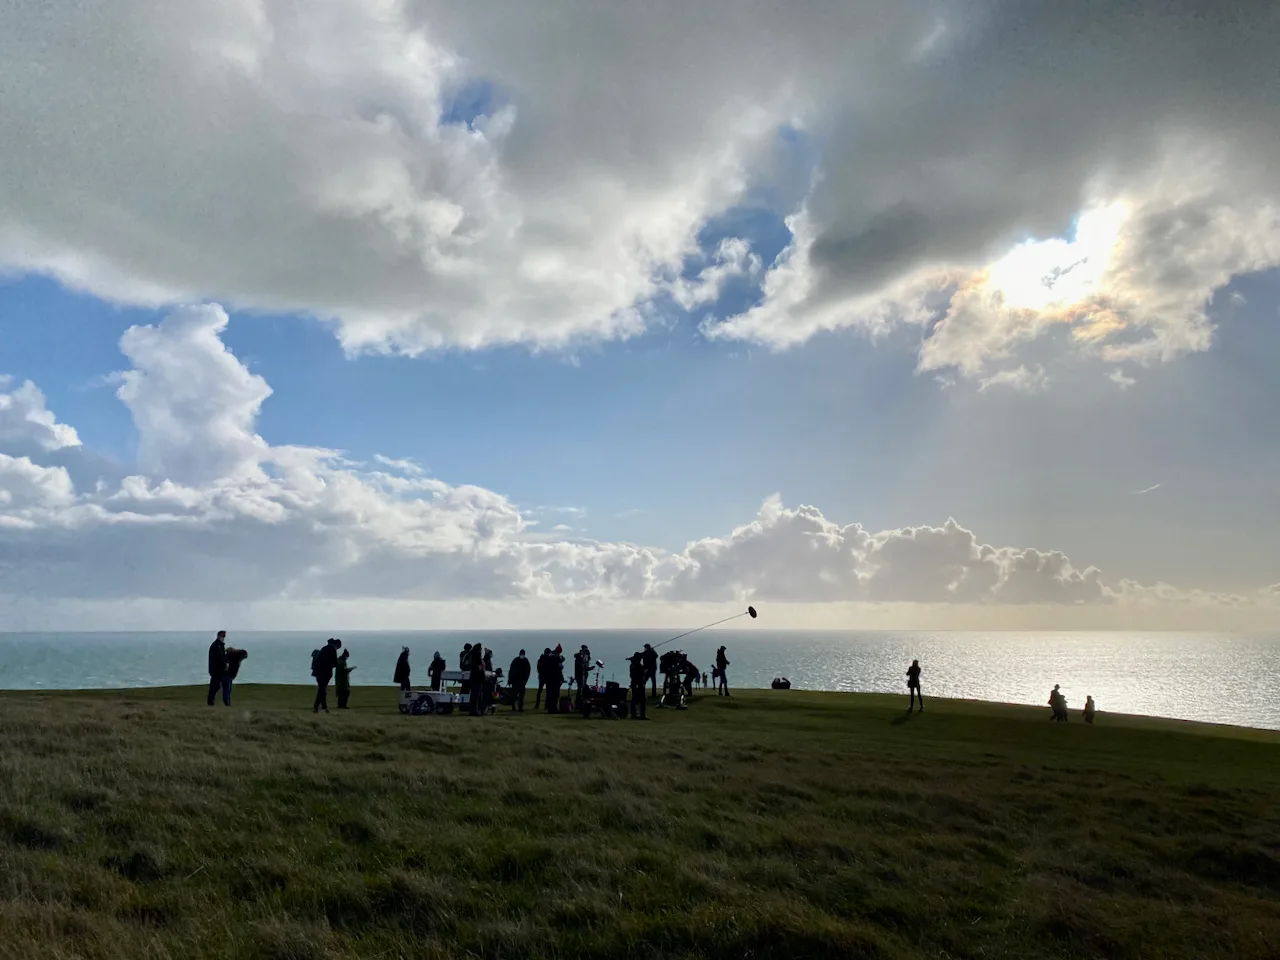 Sussex’s Landscapes And Coastlines: Prime Locations For Action-Dramas